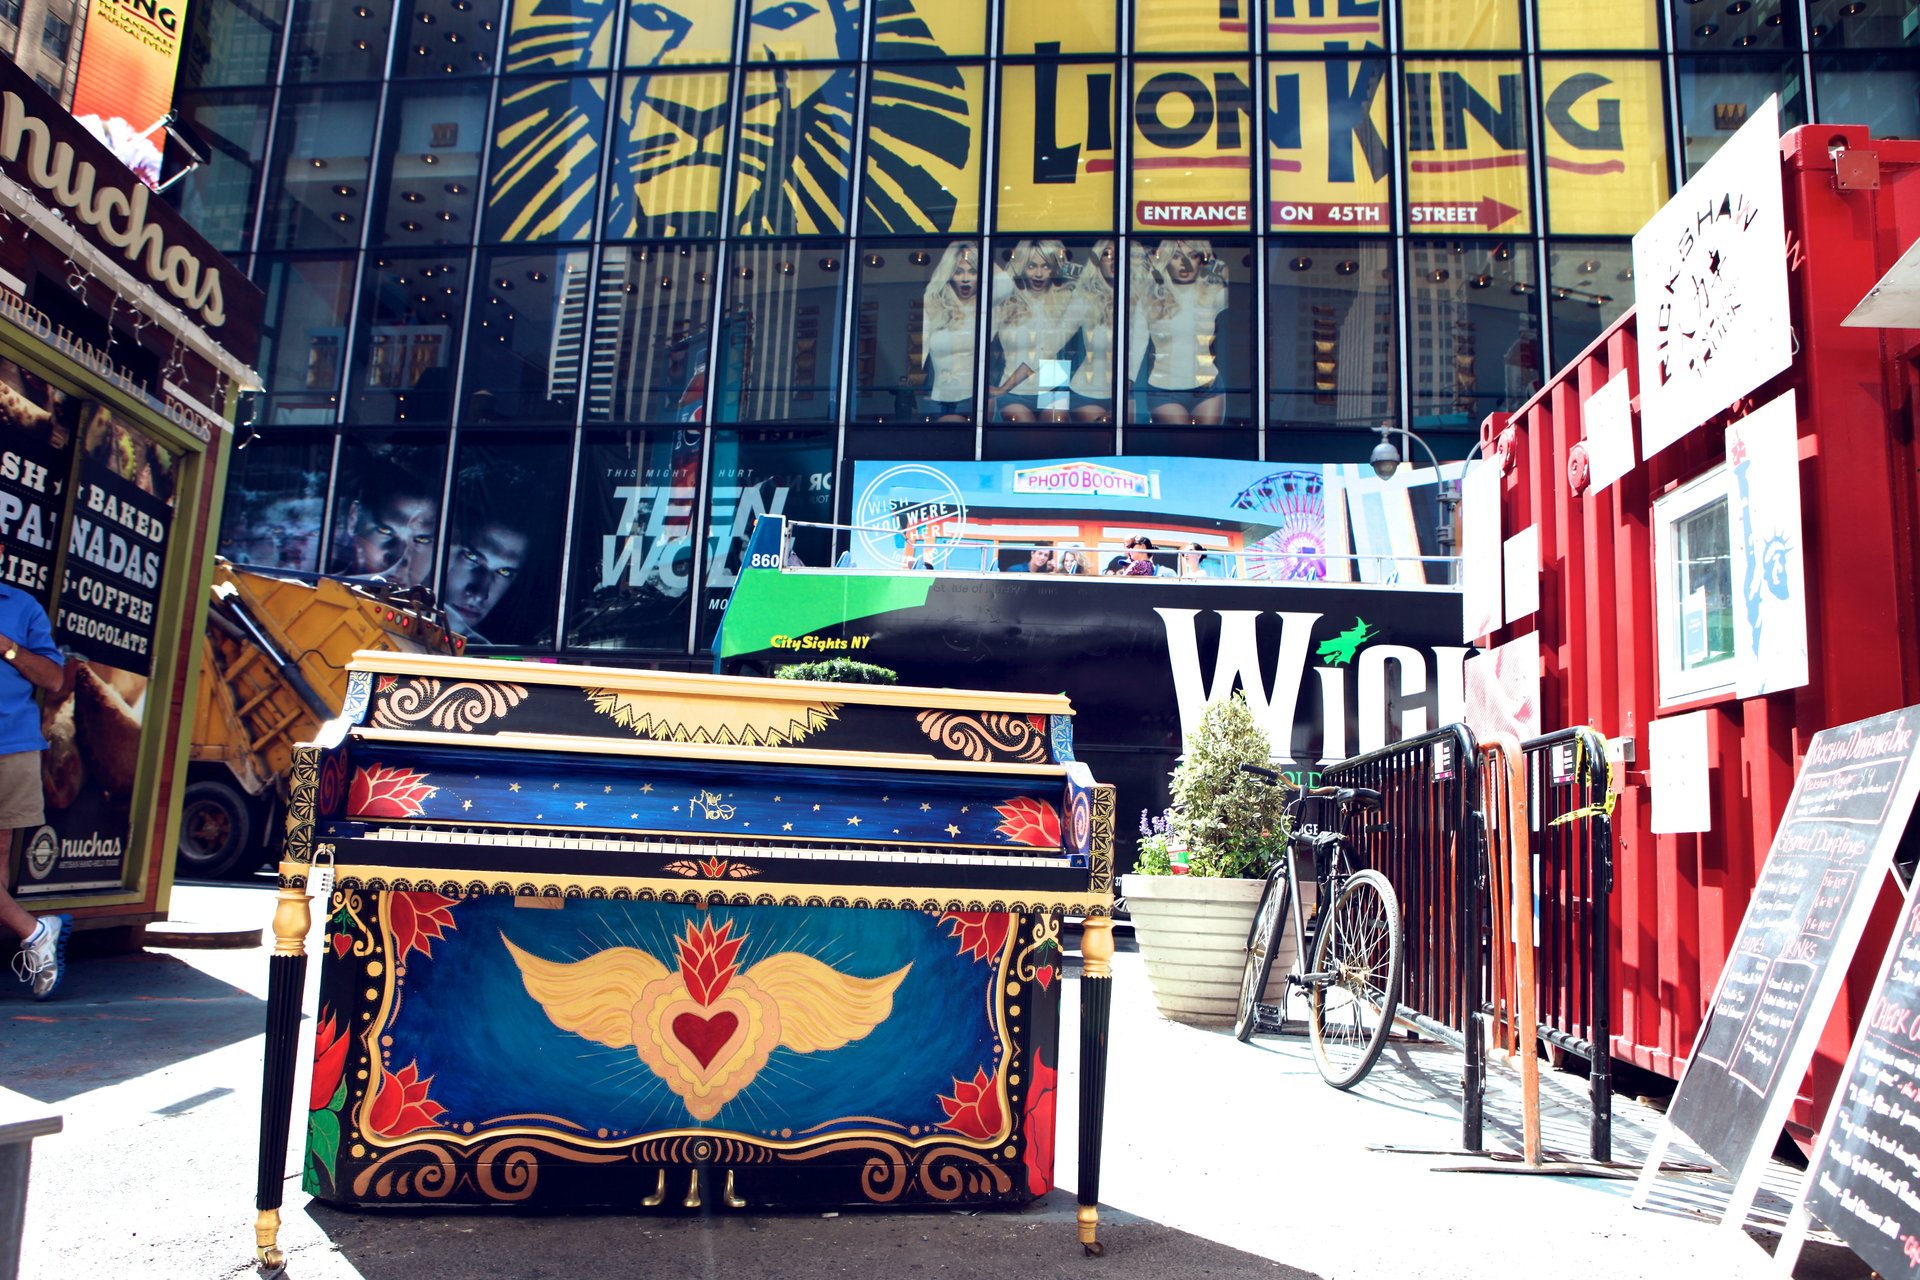  In 2014, Maxine painted a piano for the organization  Sing for Hope .&nbsp;Her piano was selected to be displayed in Times Square as part of their NYC public art interactive installation. 